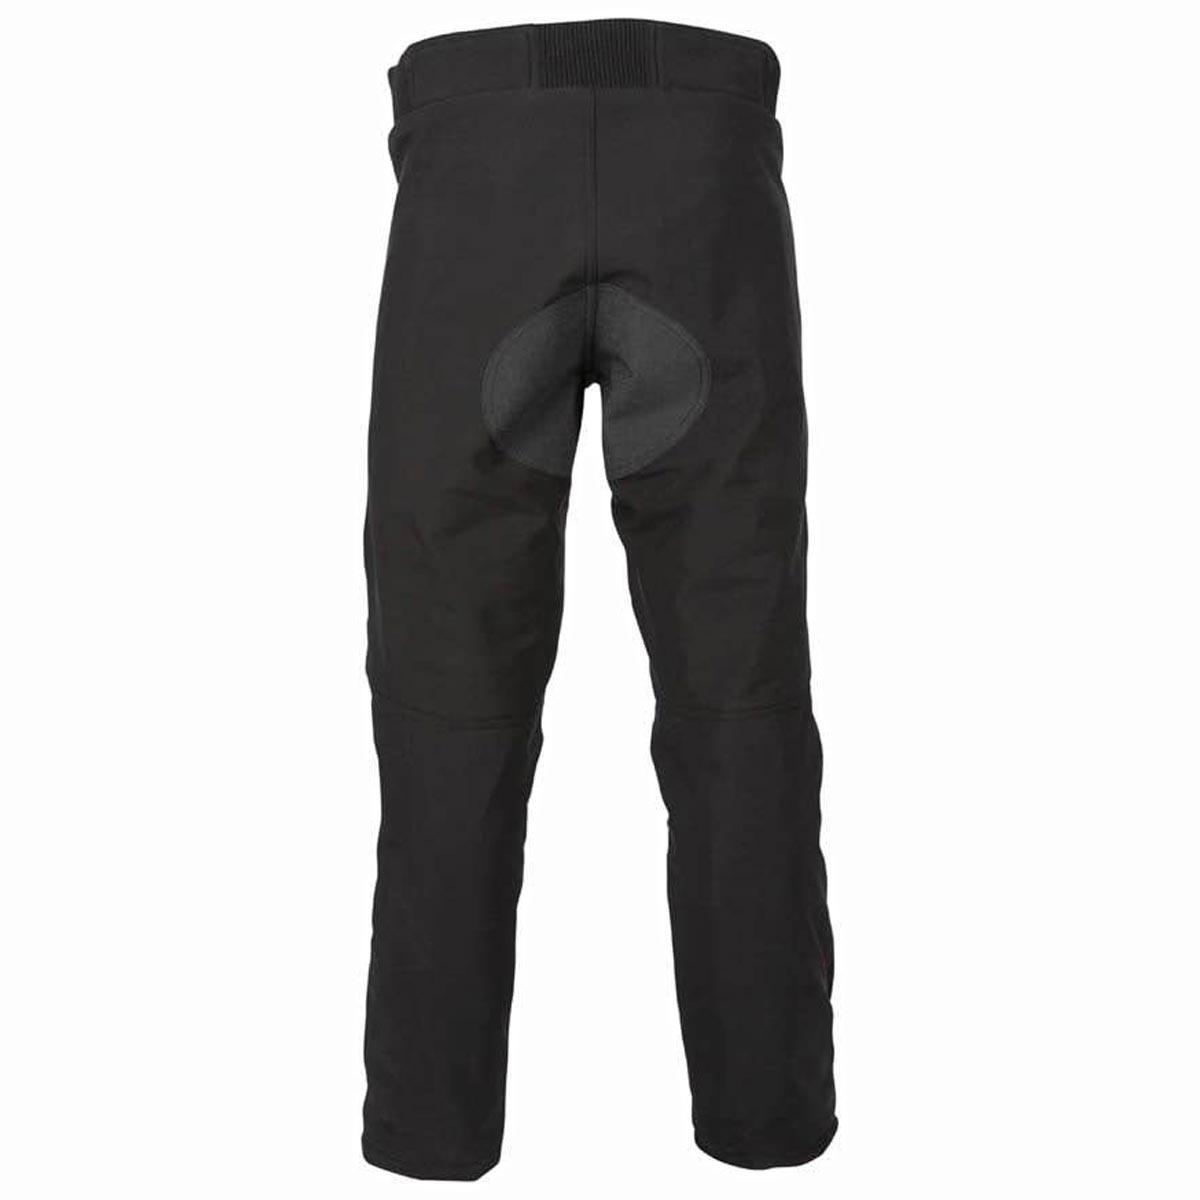 Spada Commute Trousers CE WP Black - Motorcycle TrousersThe Spada Commute trousers combine both style and function. Constructed from softshell backed by a waterproof membrane, these lightweight trousers are great for riders who want something more casual 